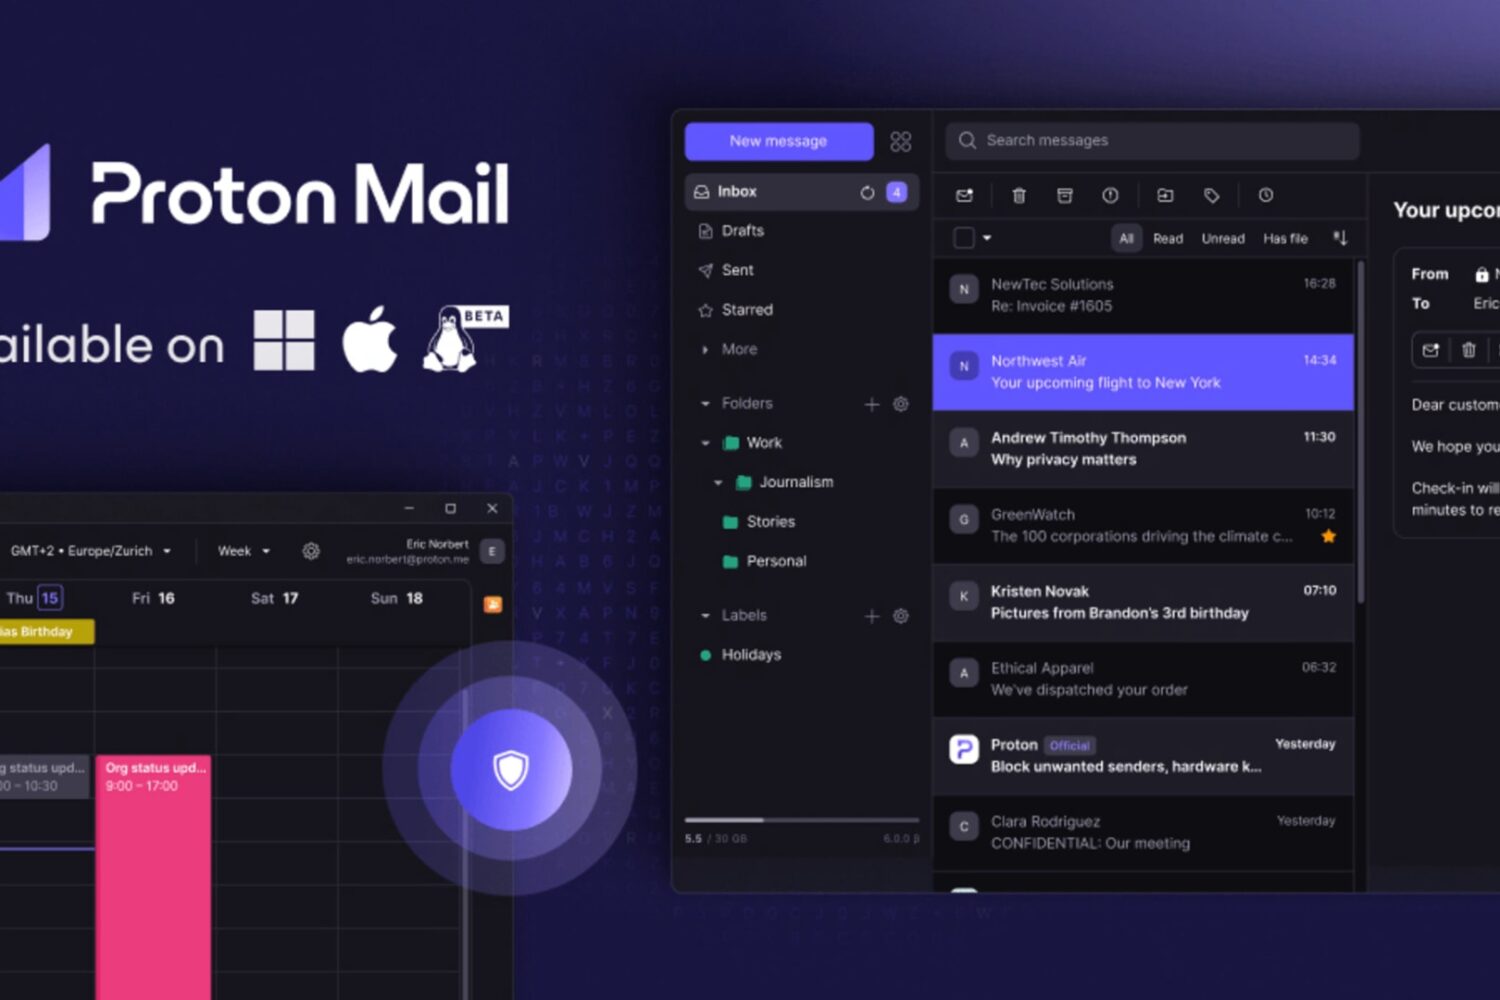 Marketing image showcasing Proton Mail for macOS, Windows and Linux